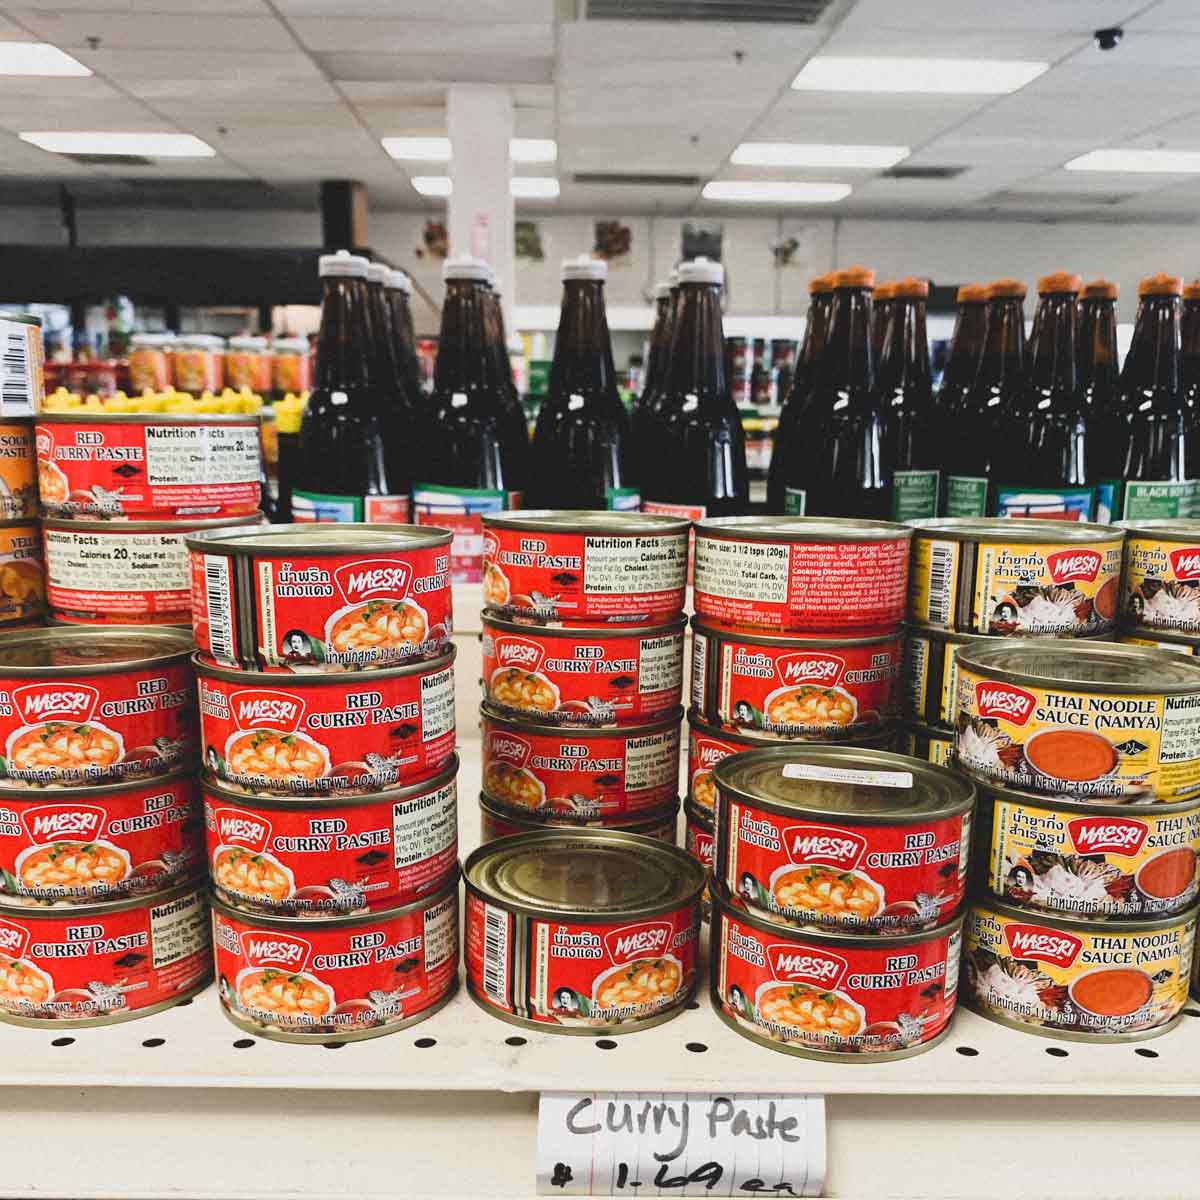 Cans of various curry pastes in a Laotian supermarket in the US